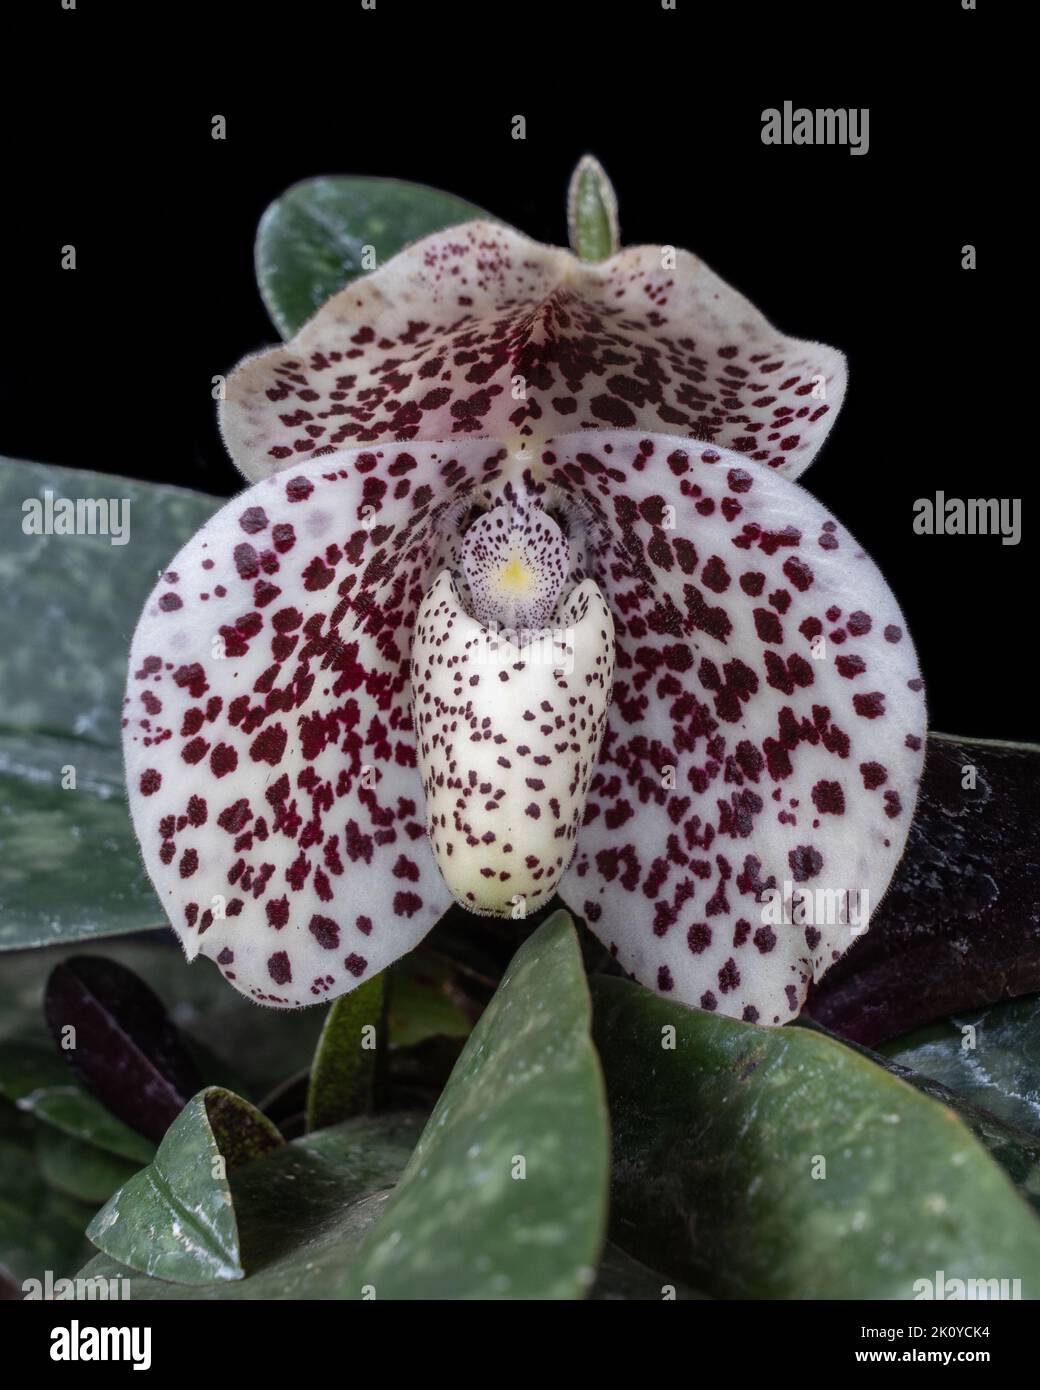 Closeup view of beautiful white and purple flower of lady slipper orchid species paphiopedilum bellatulum isolated on black background Stock Photo